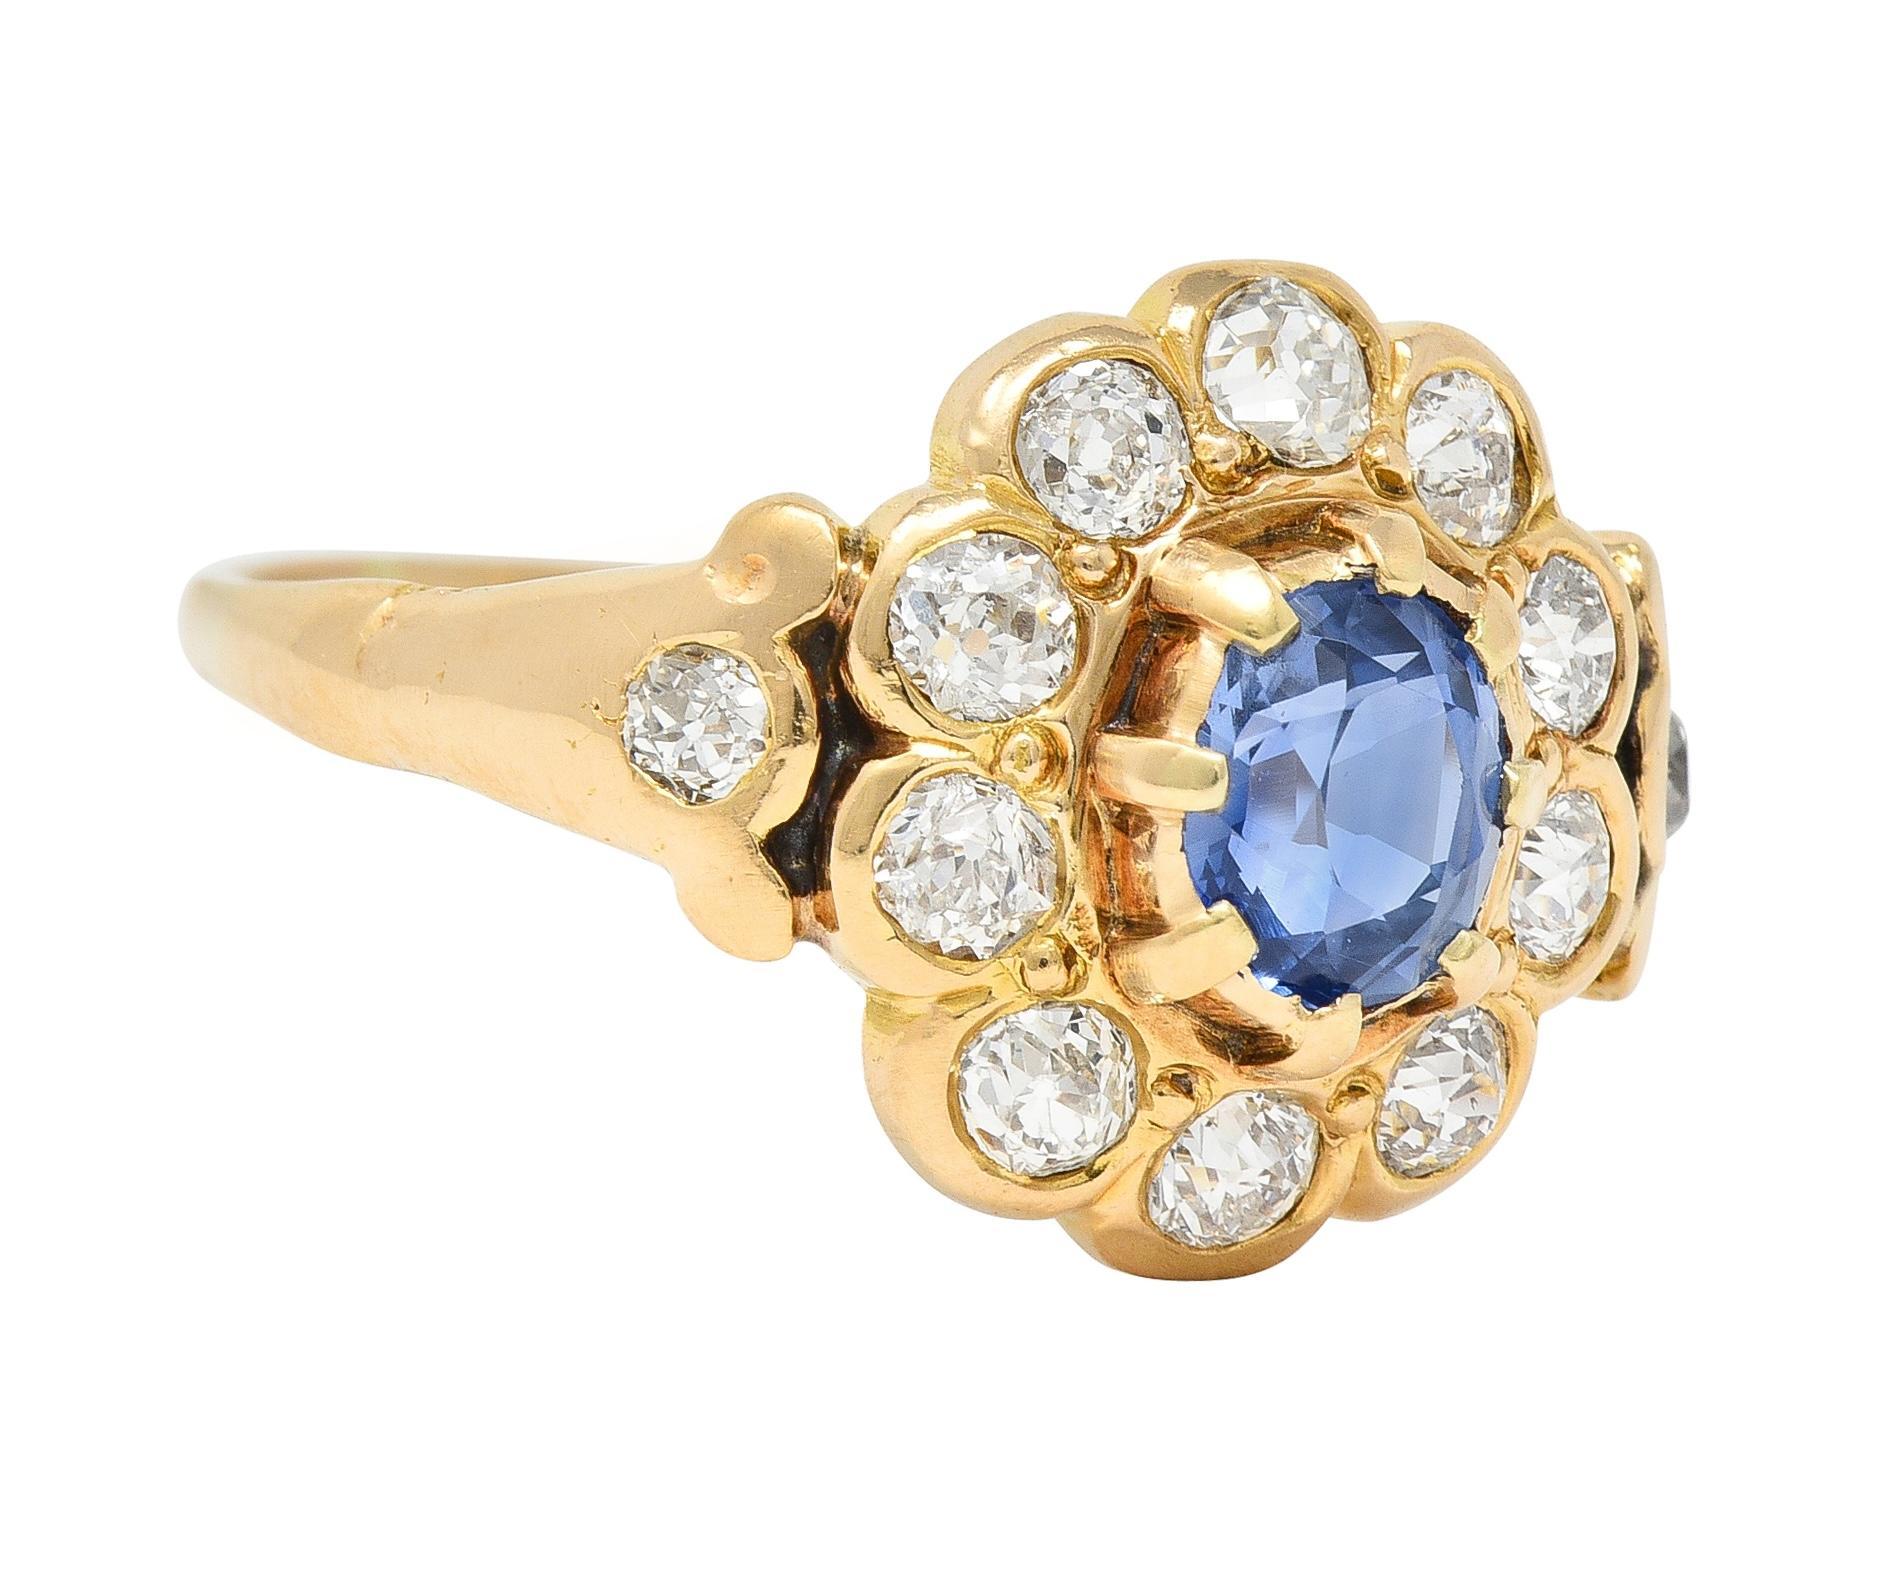 Centering an oval cut sapphire weighing approximately 0.71 carat total - transparent medium blue in color
Set in a gold bezel with extruding prongs and featuring old European cut diamonds in halo surround
Bezel set with additional diamonds flush set